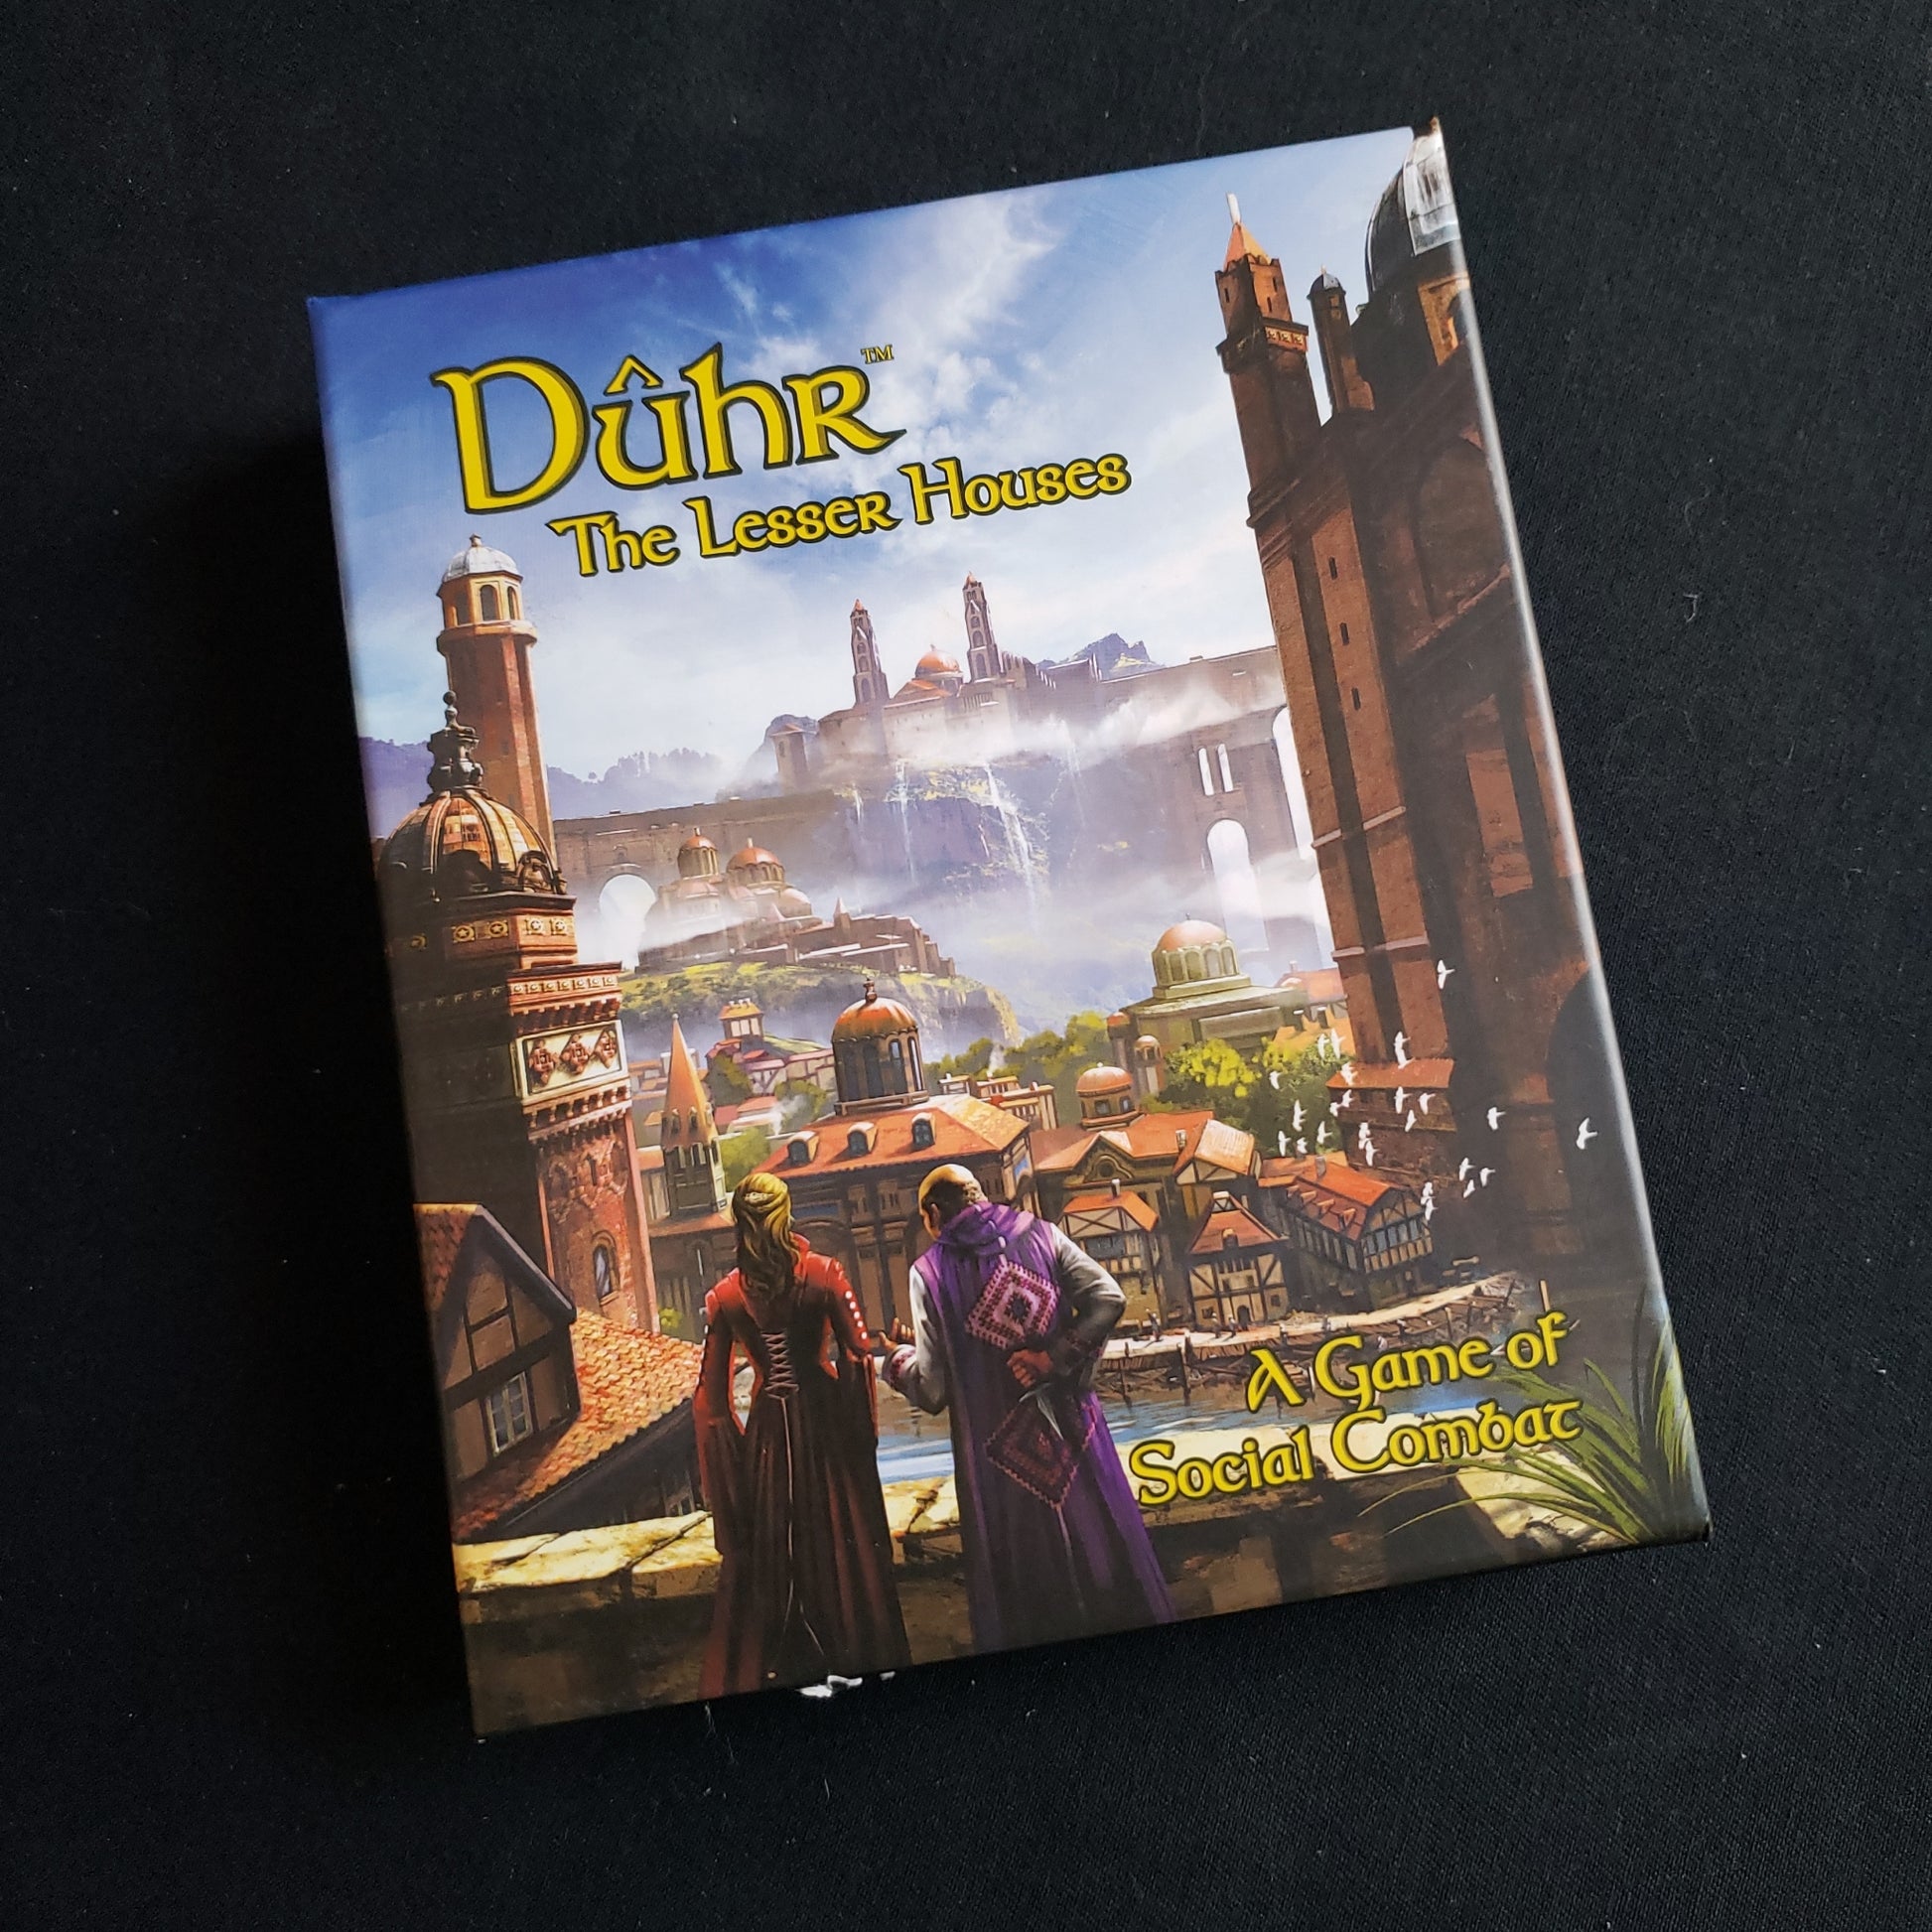 Image shows the front cover of the box of the Duhr: The Lesser Houses card game